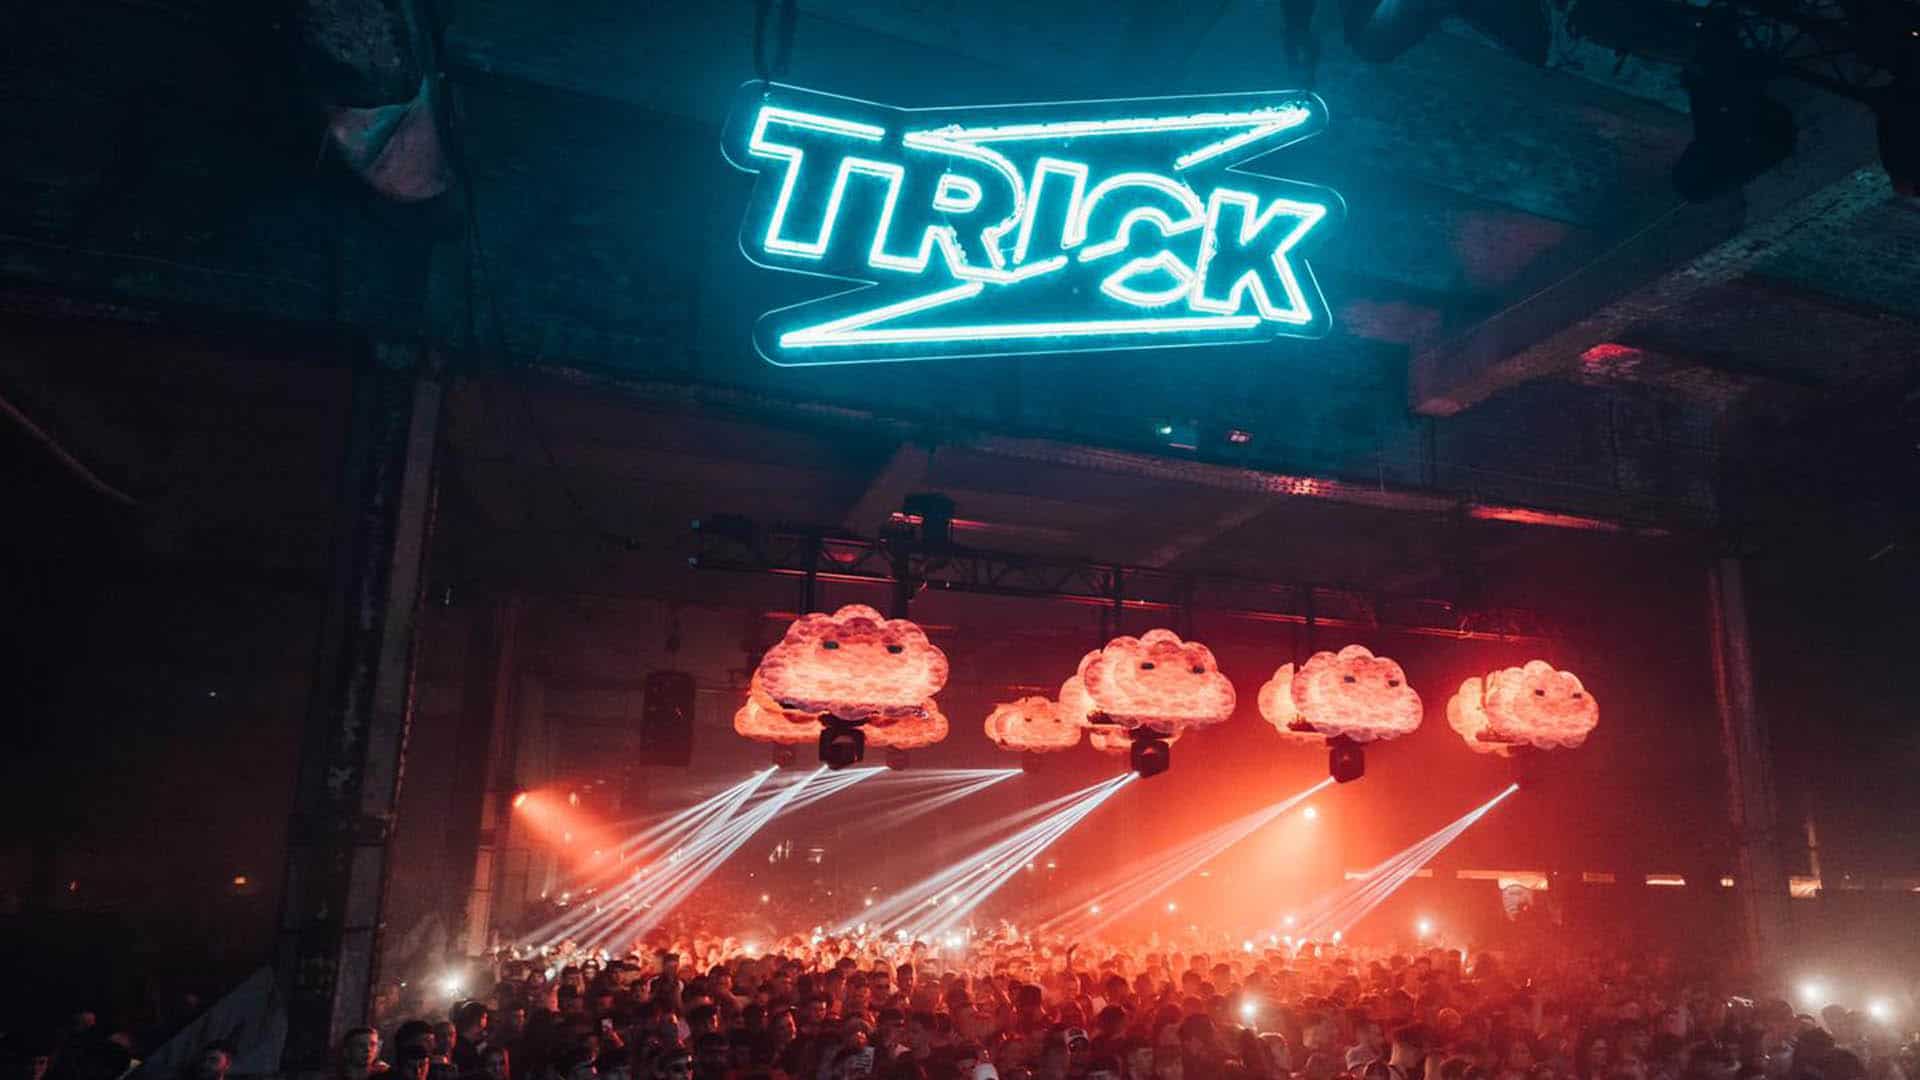 Patrick Topping announces Trick first-ever Ibiza residency in the legendary DC-10